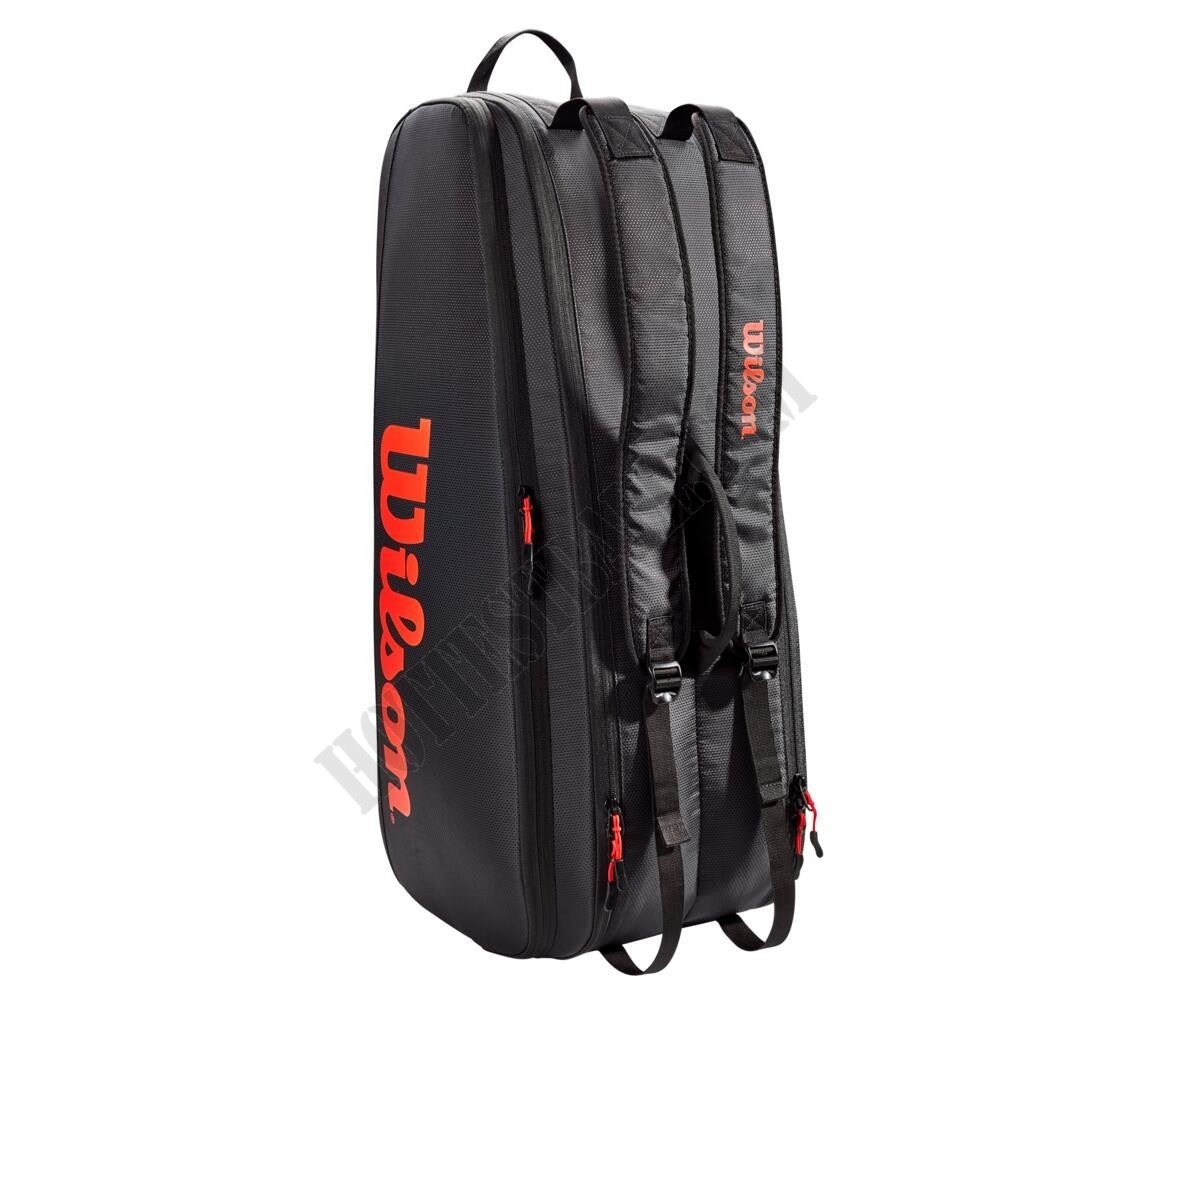 Tour 6 Pack Bag - Wilson Discount Store - -2